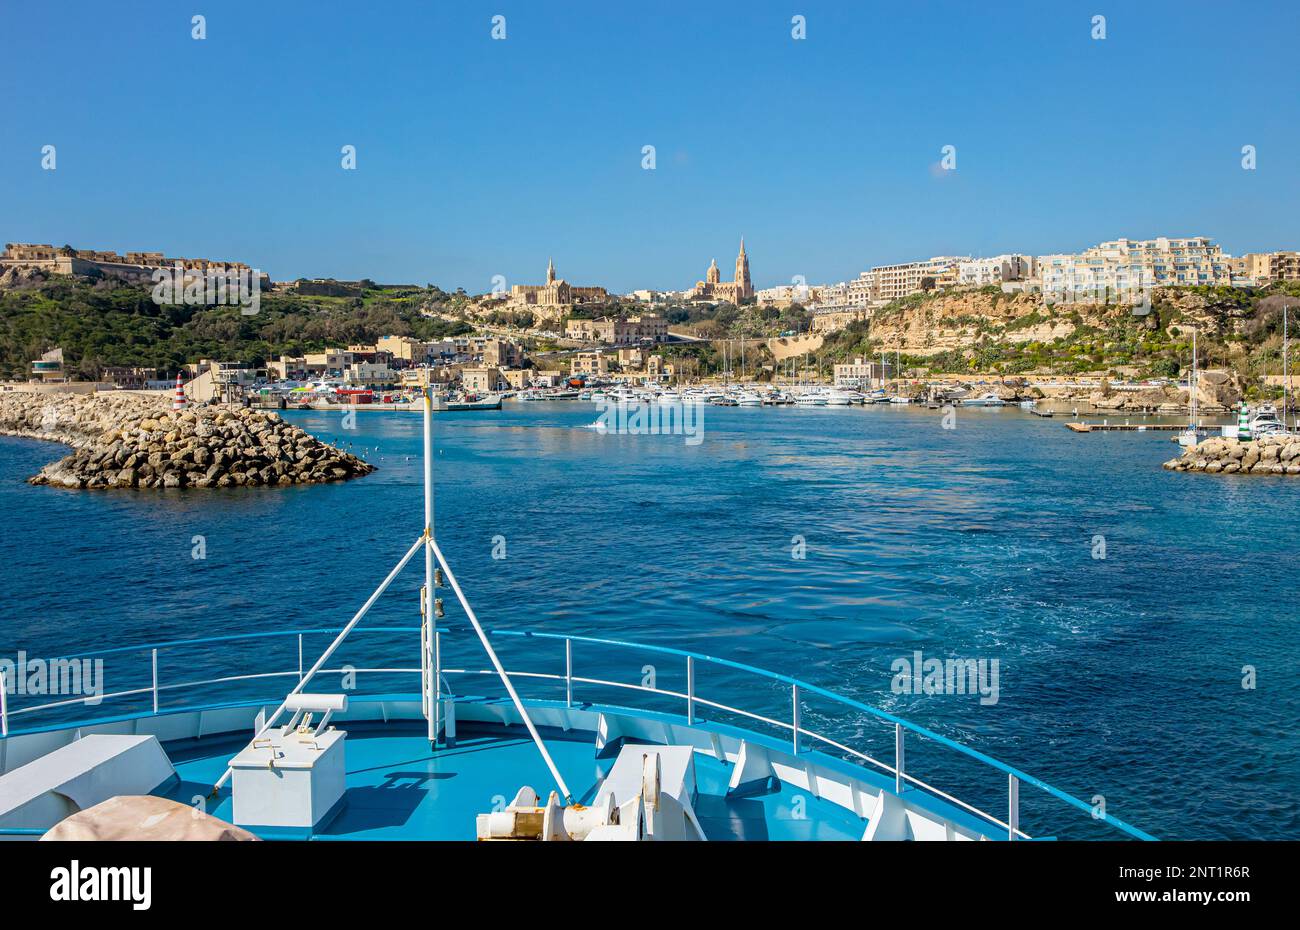 The ship arrives at the port of Mġarr on the island of Gozo, Malta. Beautiful city on the cliffs and hills on the background on sunny spring day. Stock Photo